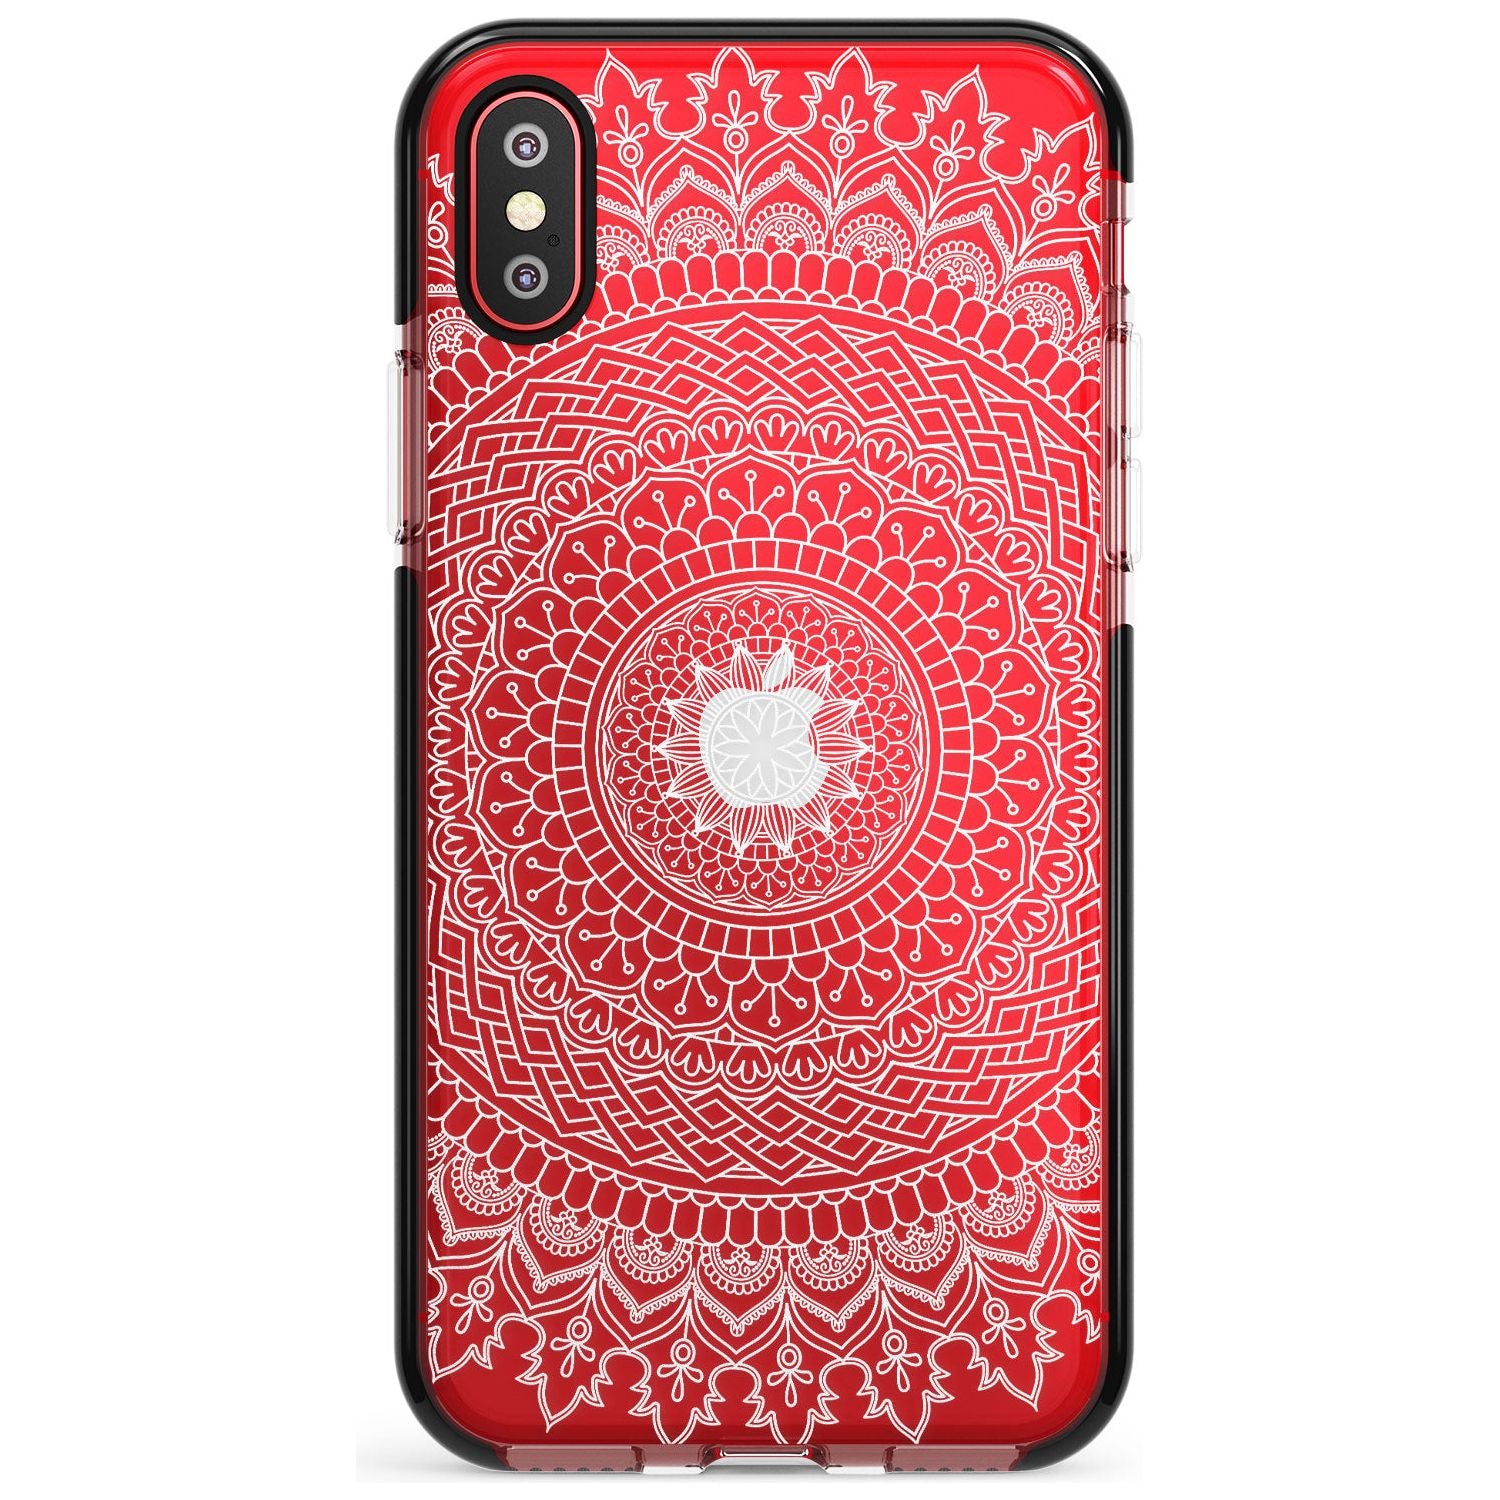 Large White Mandala Transparent Design Pink Fade Impact Phone Case for iPhone X XS Max XR